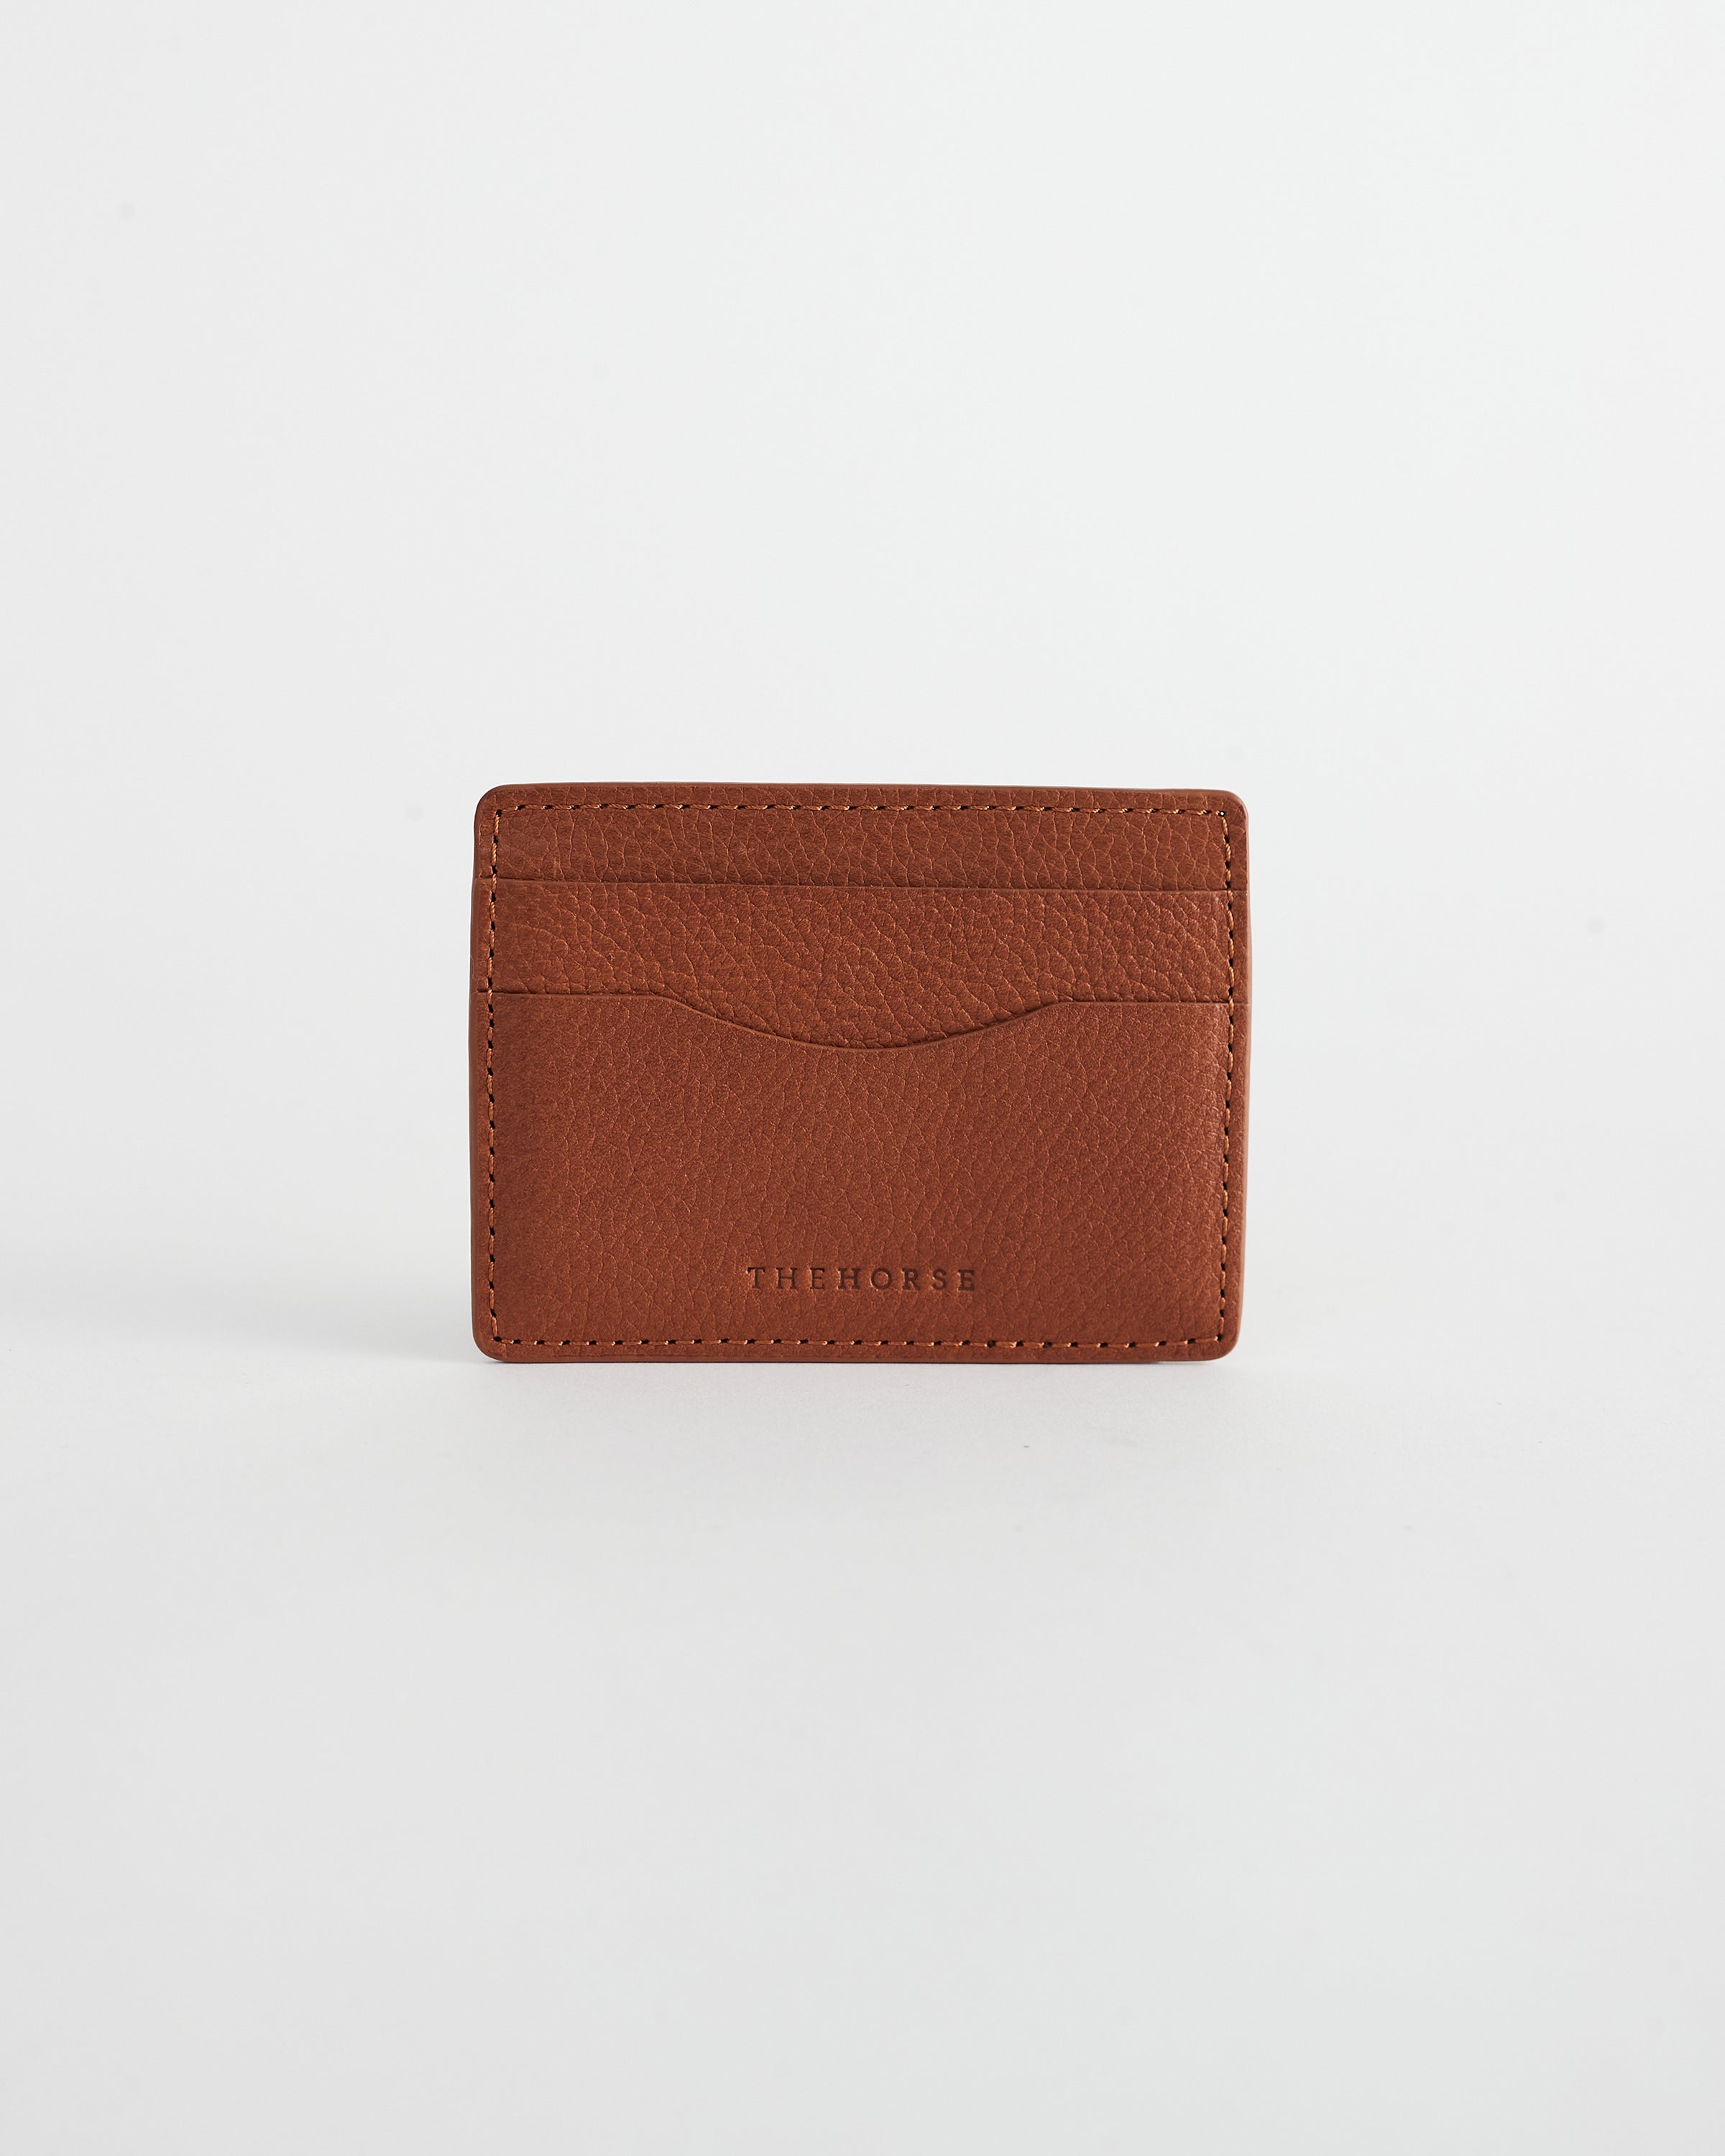 Flatboy Card Holder Wallet in Tan Leather by The Horse®